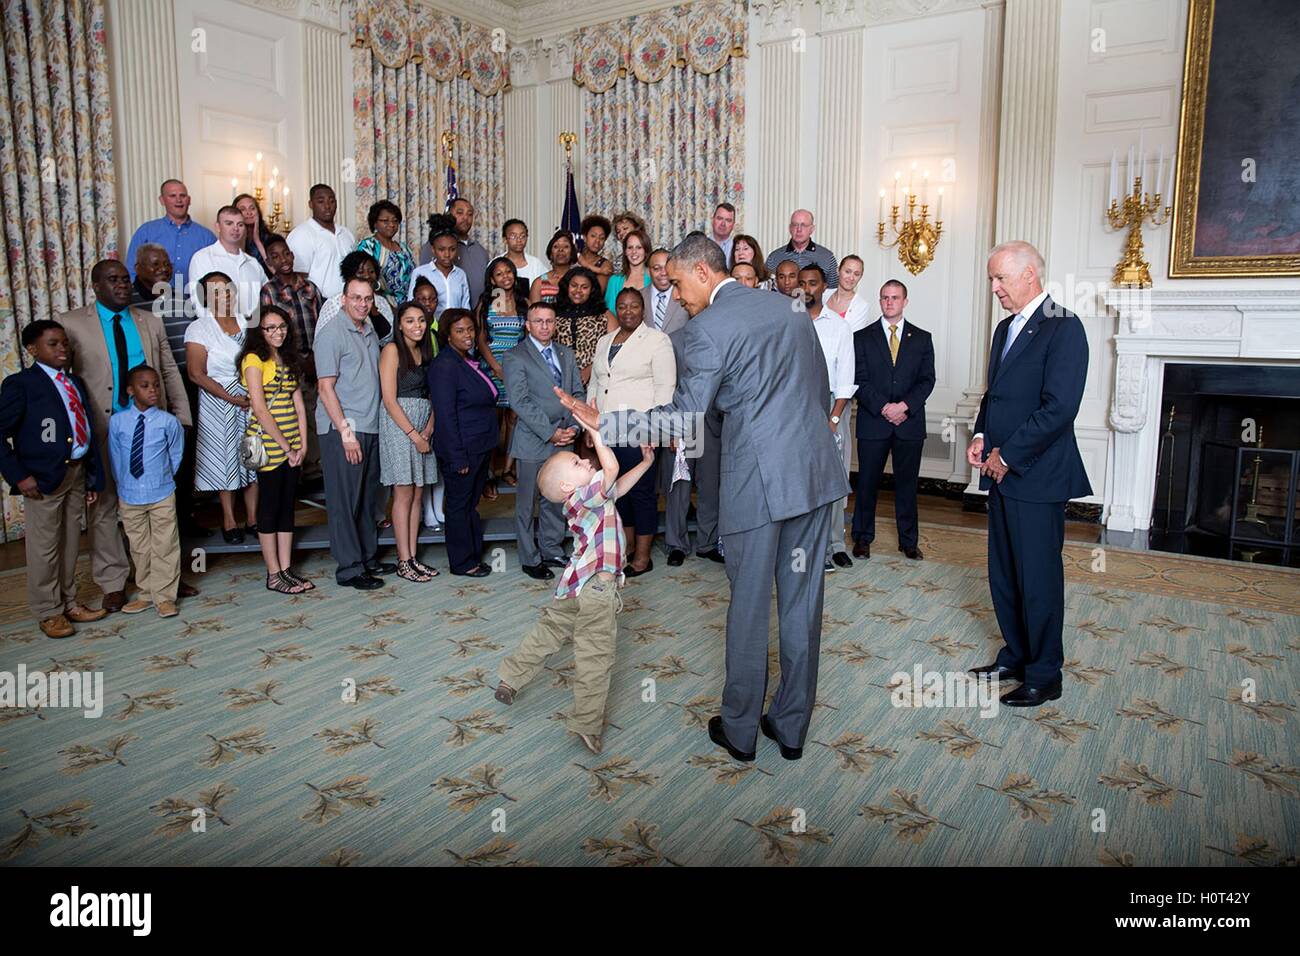 U.S. President Barack Obama high-fives a little boy as he and U.S. Vice President Joe Biden greet wounded warriors and their families during a tour of the East Room June 23, 2014 in Washington, DC. Stock Photo